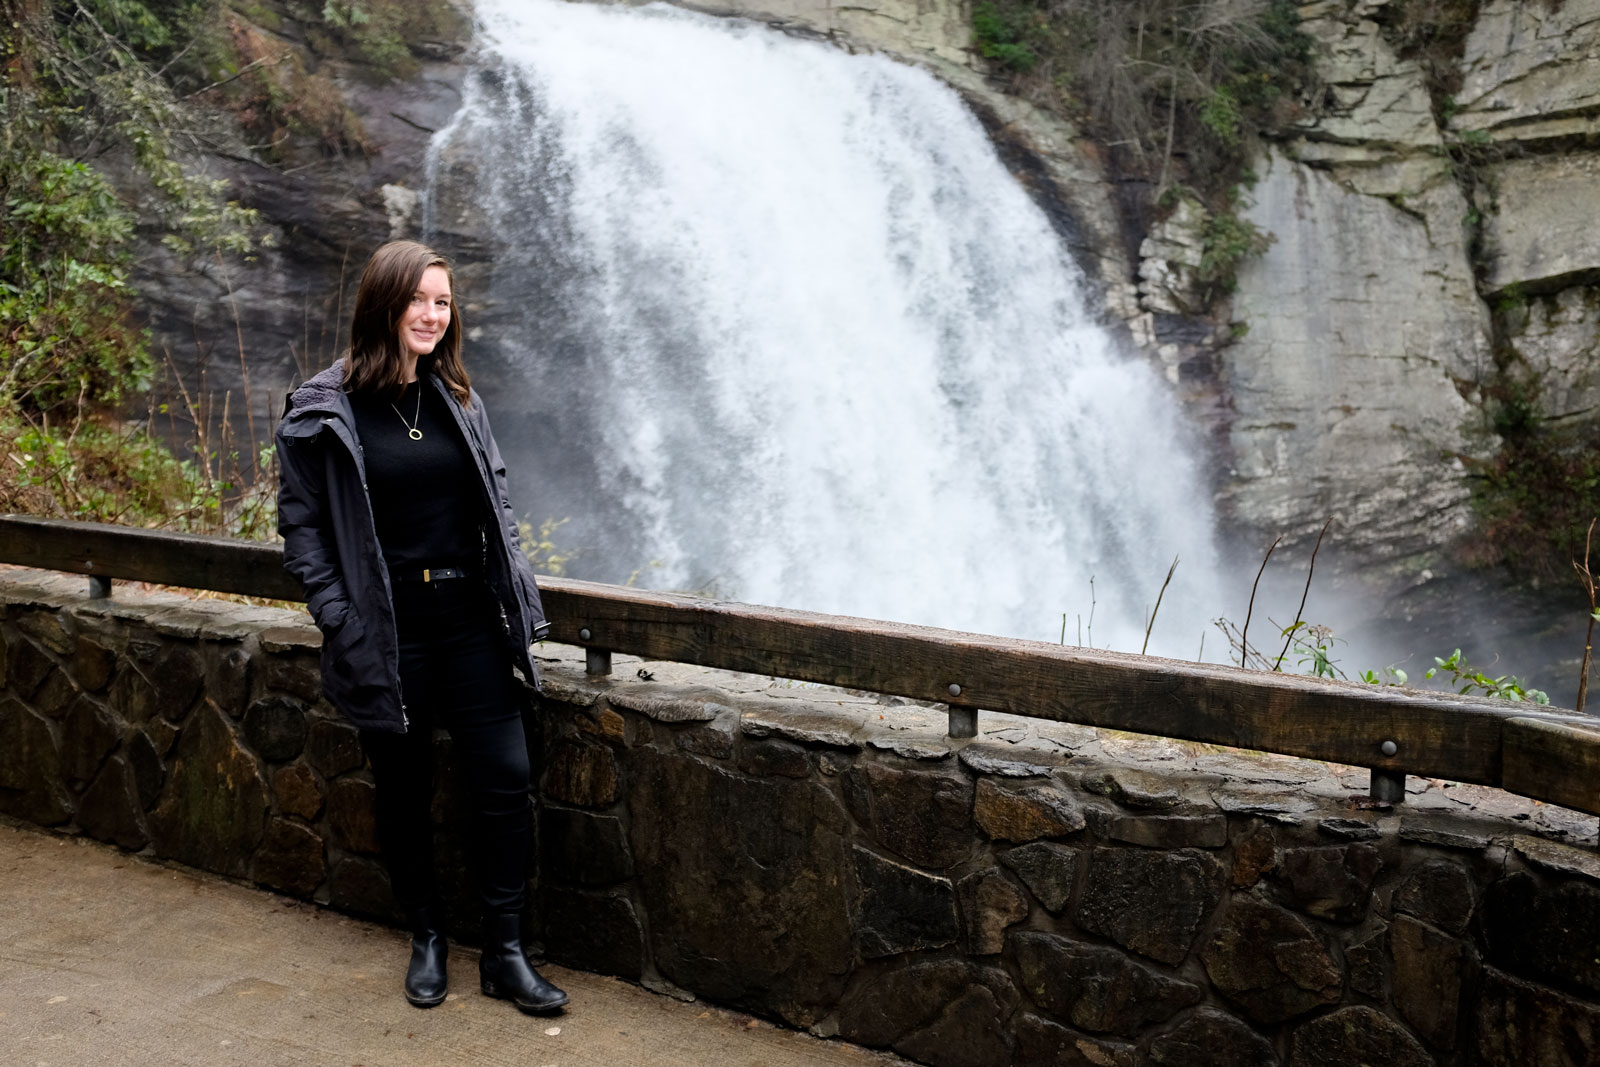 Alyssa stands in front of Looking Glass Falls